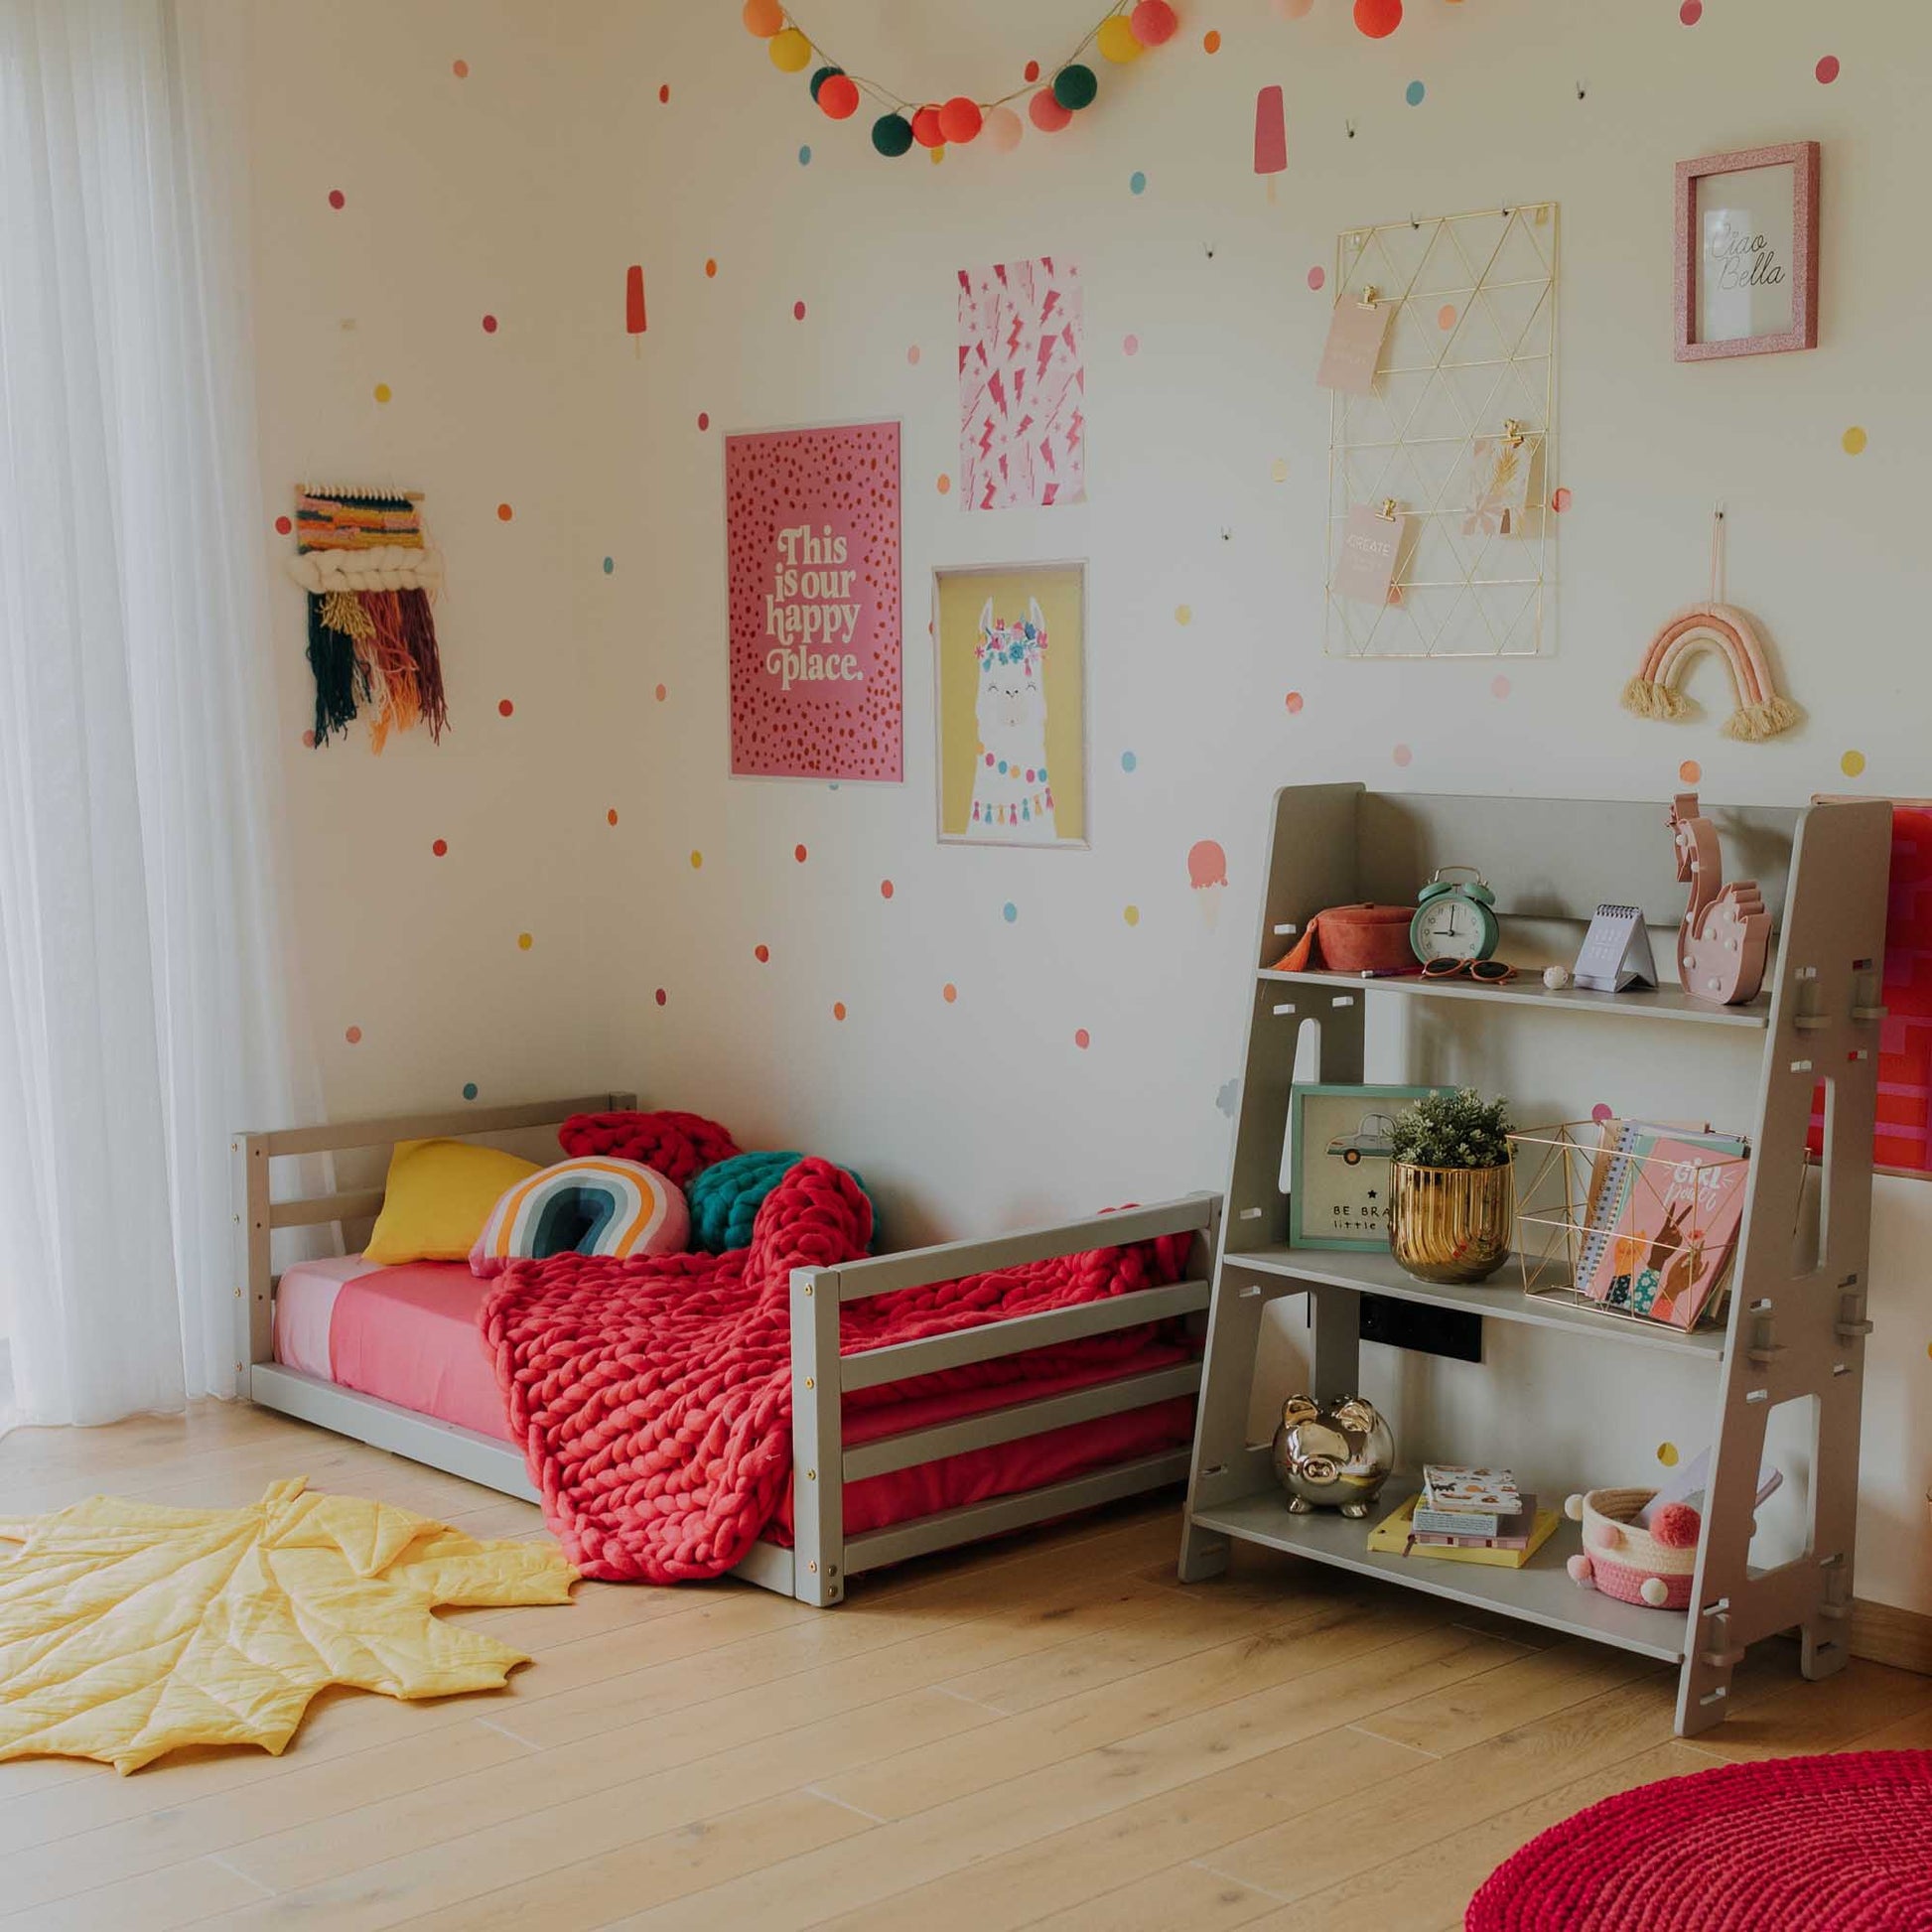 A Sweet Home From Wood 2-in-1 kids' bed with a horizontal rail headboard and footboard for a child's room adorned with colorful polka dots.